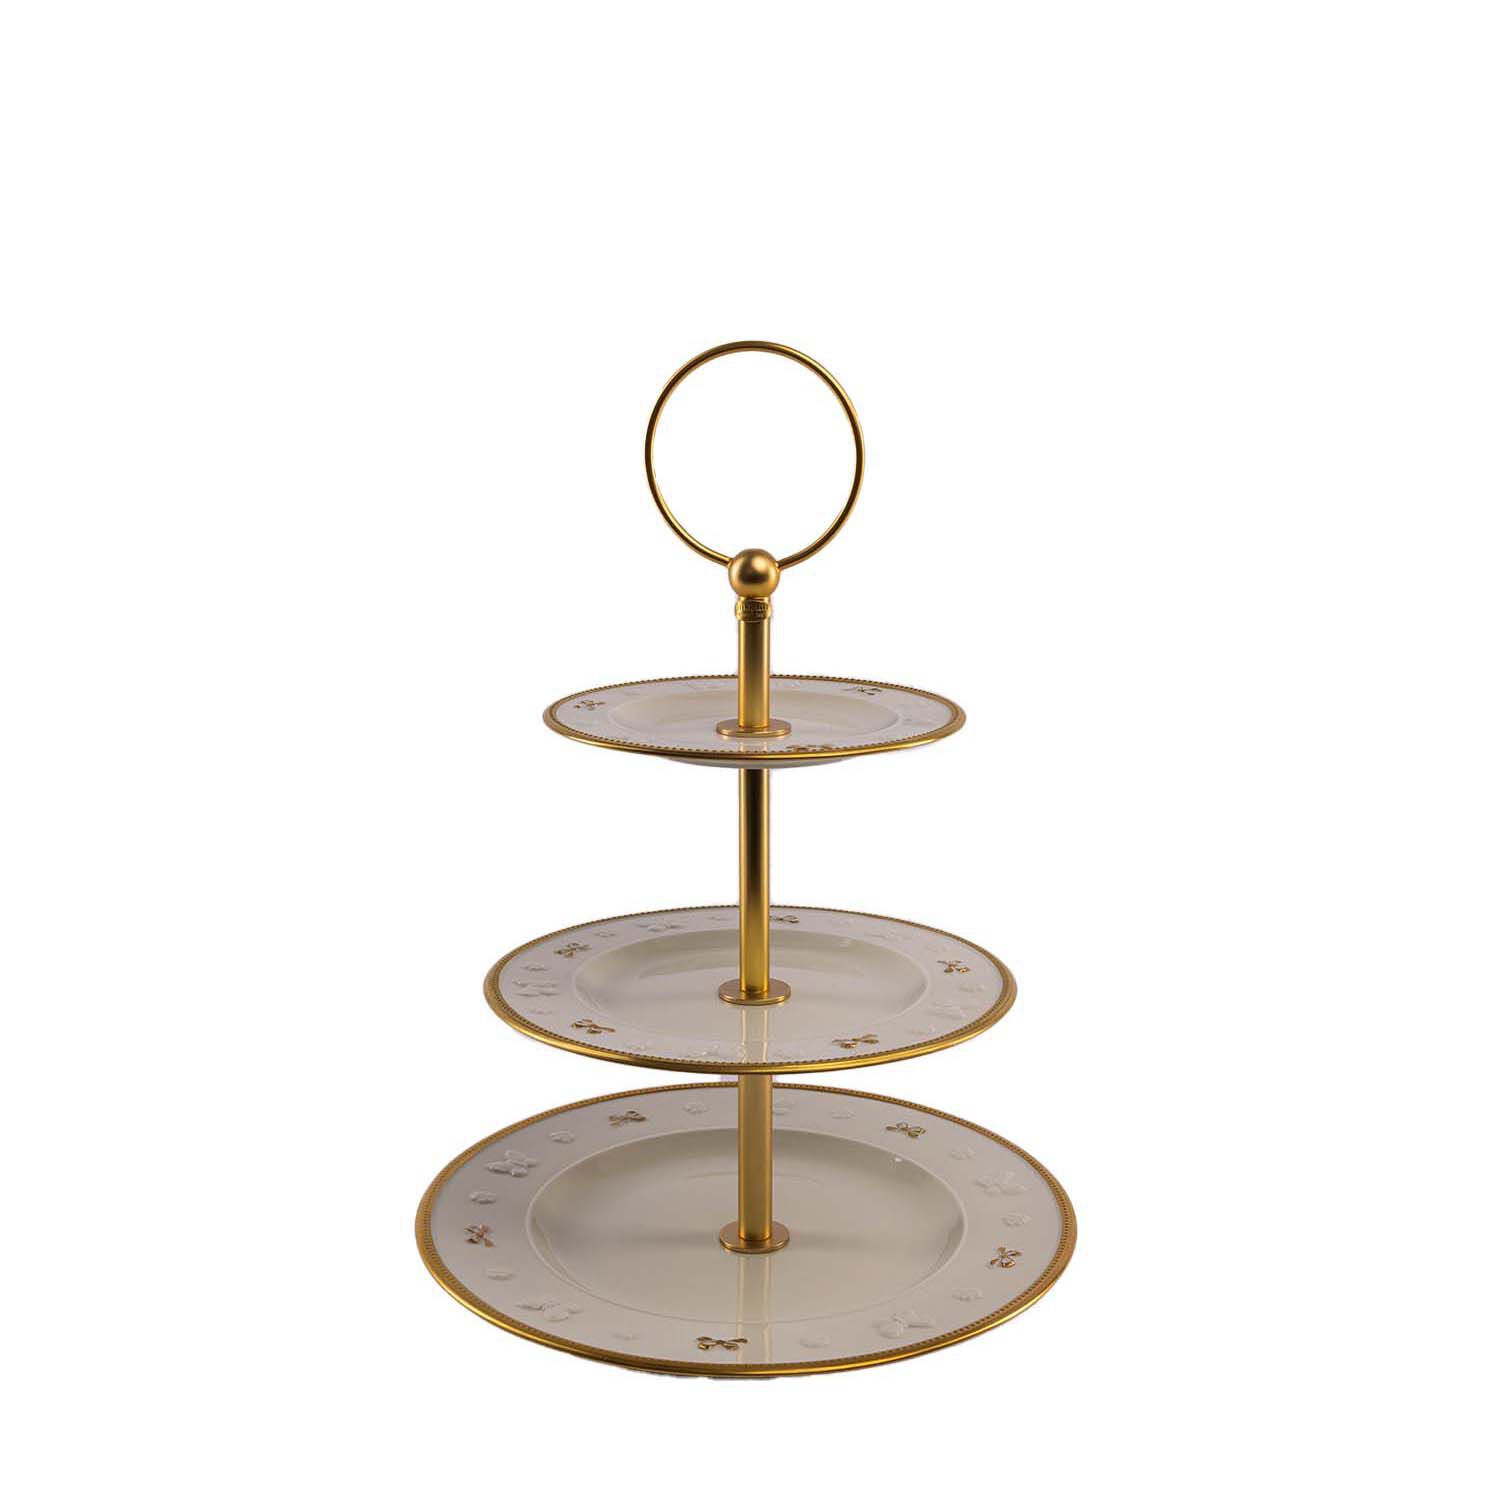 Oukaning 3PCS Cupcake Stands for Wedding Cake Stands Dessert Display Plates  Set Table Decorations for Wedding Party Event Gold - Walmart.com